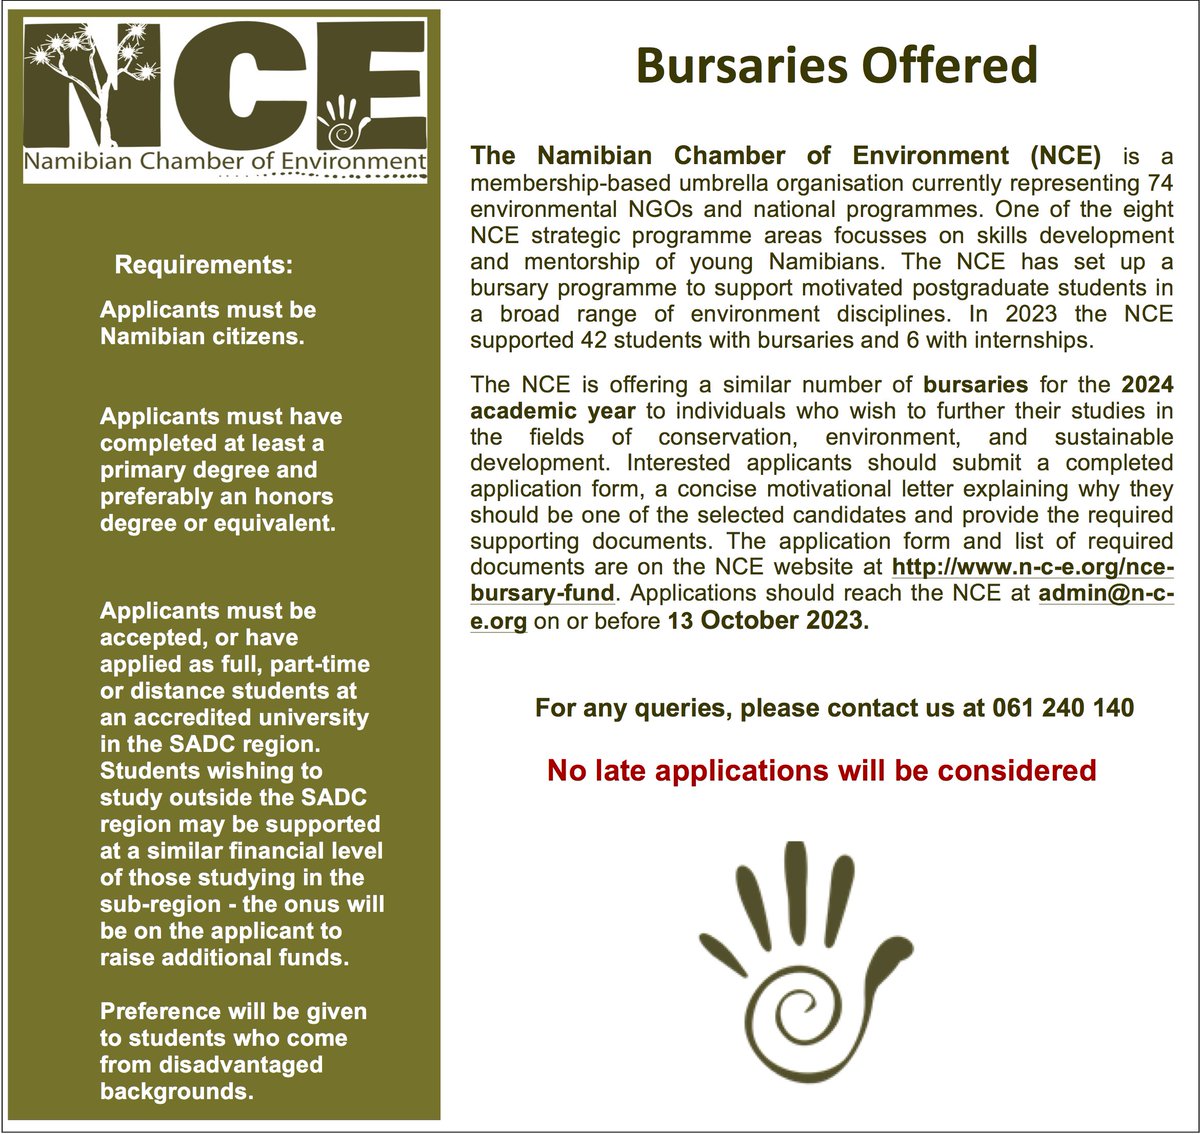 We are now accepting applications for 2024 bursaries! How to apply: Visit n-c-e.org/nce-bursary-fu… to download the application form and list of required documents. Submit completed form and documents to admin@n-c-e.org Deadline: 13 October 2023. See other requirements below.